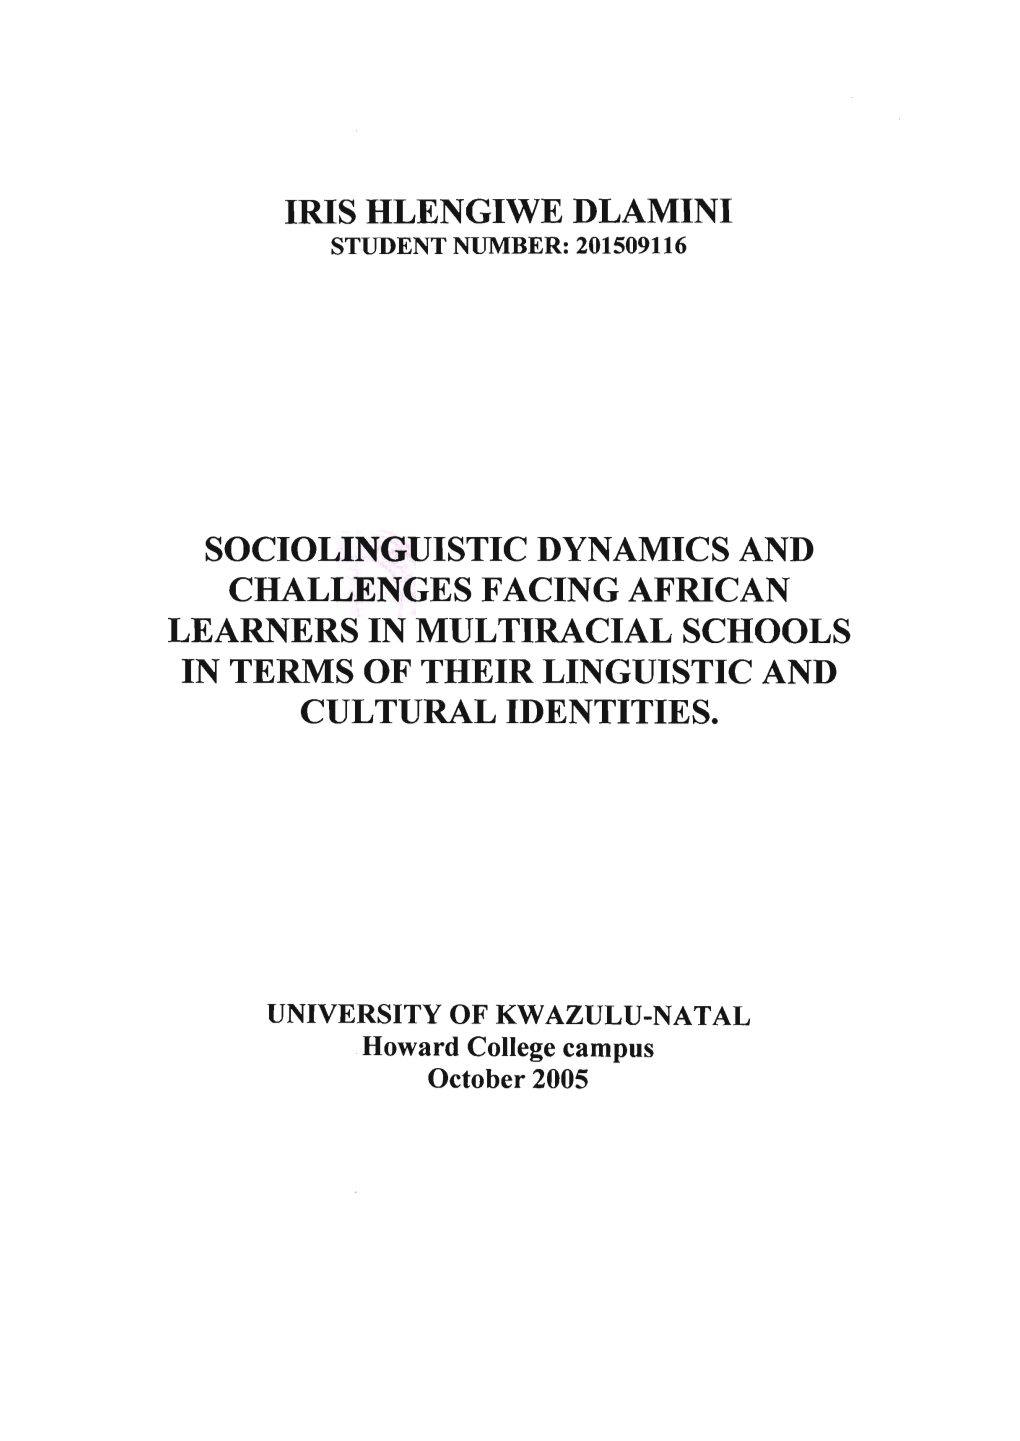 Sociolinguistic Dynamics and Challenges Facing African Learners in Multiracial Schools in Terms of Their Linguistic and Cultural Identities